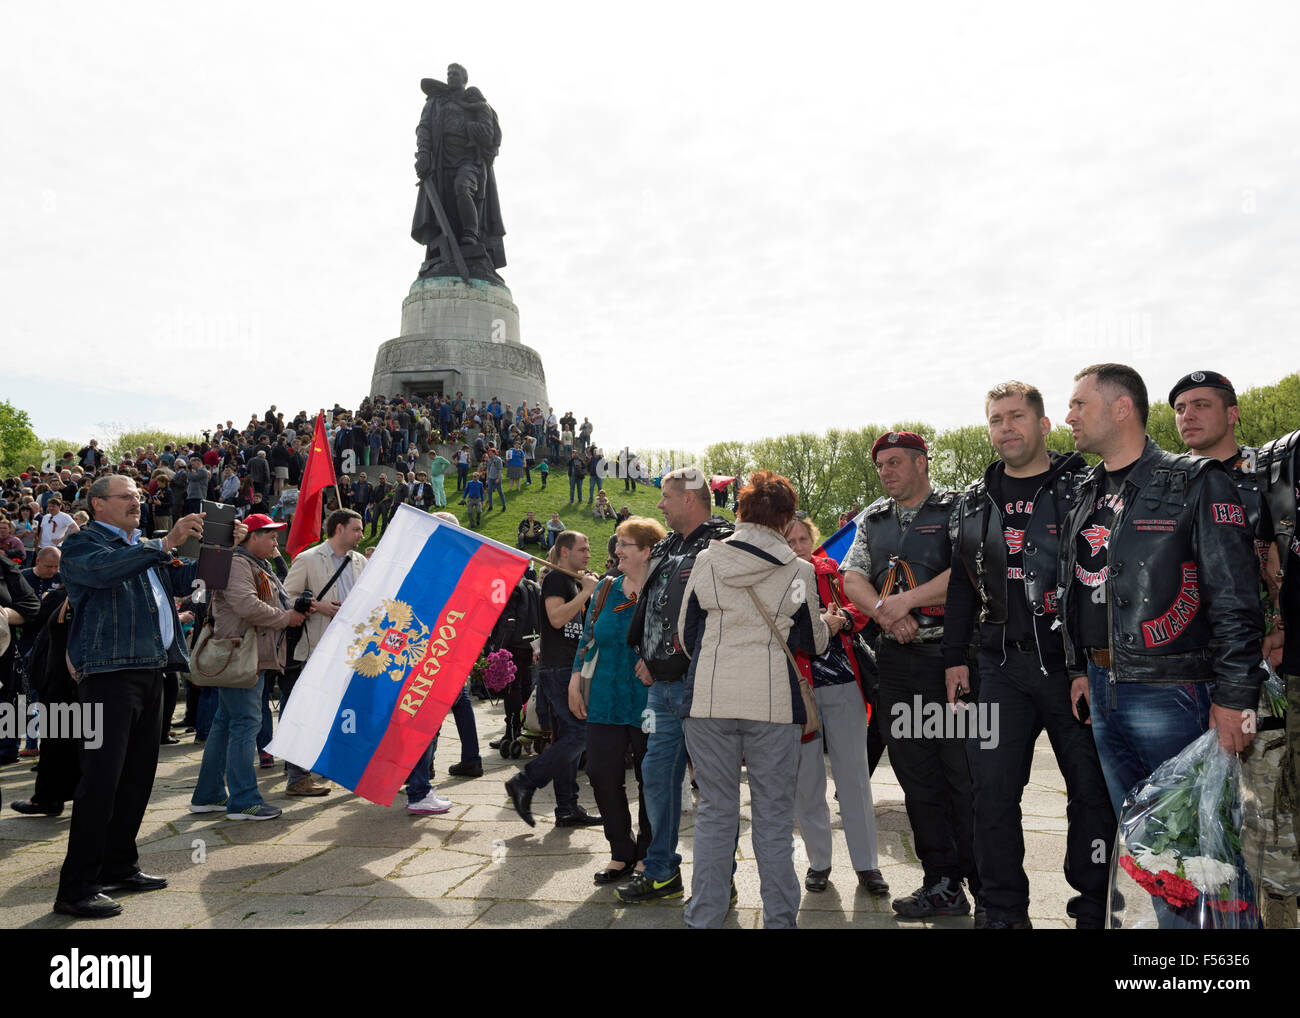 '09.05.2015, Berlin, Berlin, Germany - Soviet War Memorial Treptow, the 70th anniversary of the end of World War II that 9 May is considered in Russia as Victory Day over Nazi Germany, members of the Russian-nationalist group Rocker ''Night Wolves'' motorcycle club. EBS150509D521CAROEX.JPG - NOT for SALE in G E R M A N Y, A U S T R I A, S W I T Z E R L A N D [MODEL RELEASE: NO, PROPERTY RELEASE: NO (c) caro photo agency / Schulz, http://www.caro-images.pl, info@carofoto.pl - In case of using the picture for non-journalistic purposes, please contact the agency - the picture is subject to royalt Stock Photo